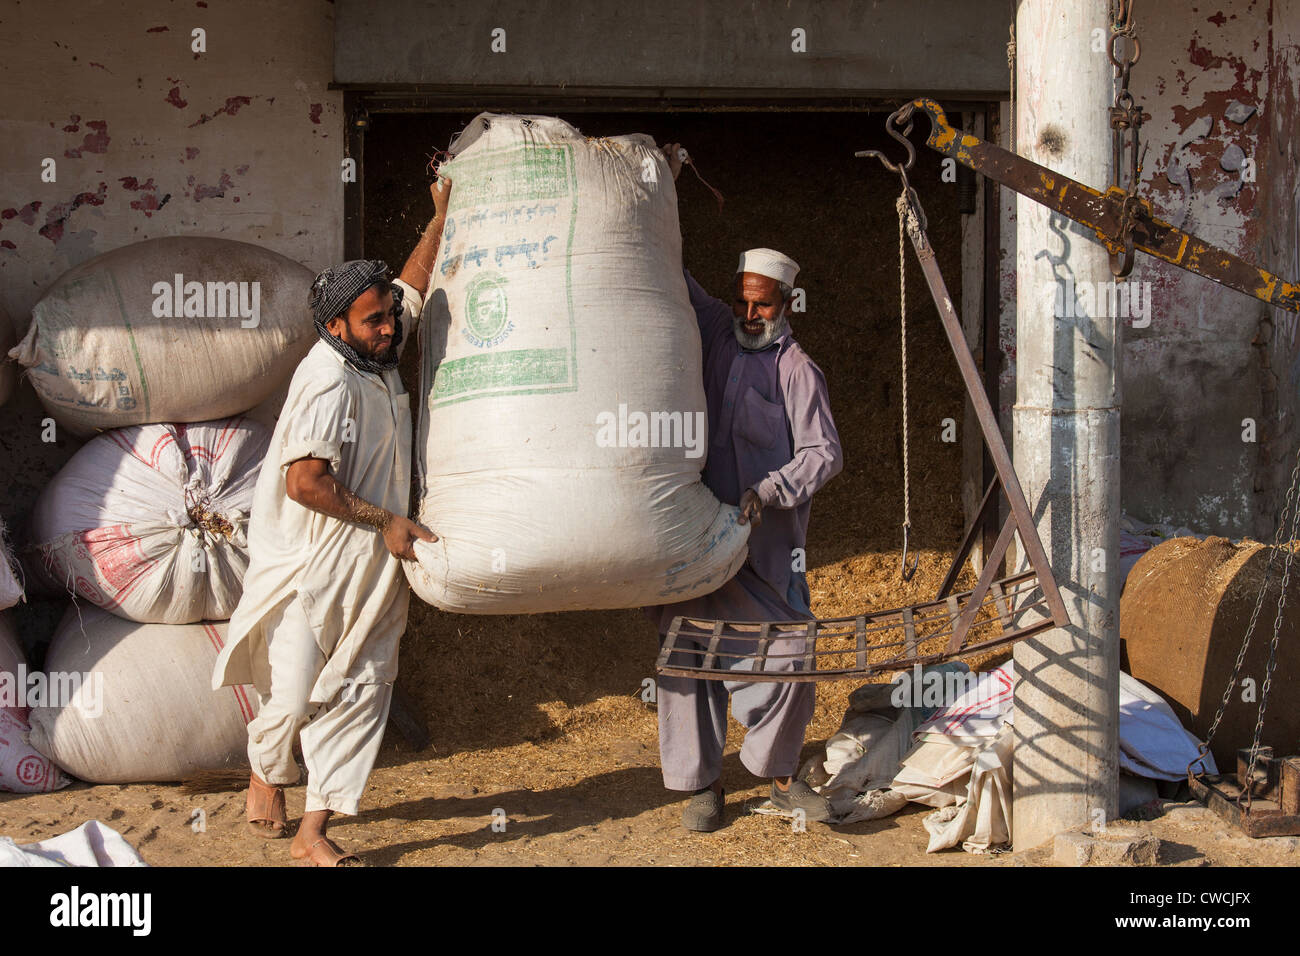 Muslim men weighing feed on the outskirts of Islamabad, Pakistan Stock Photo